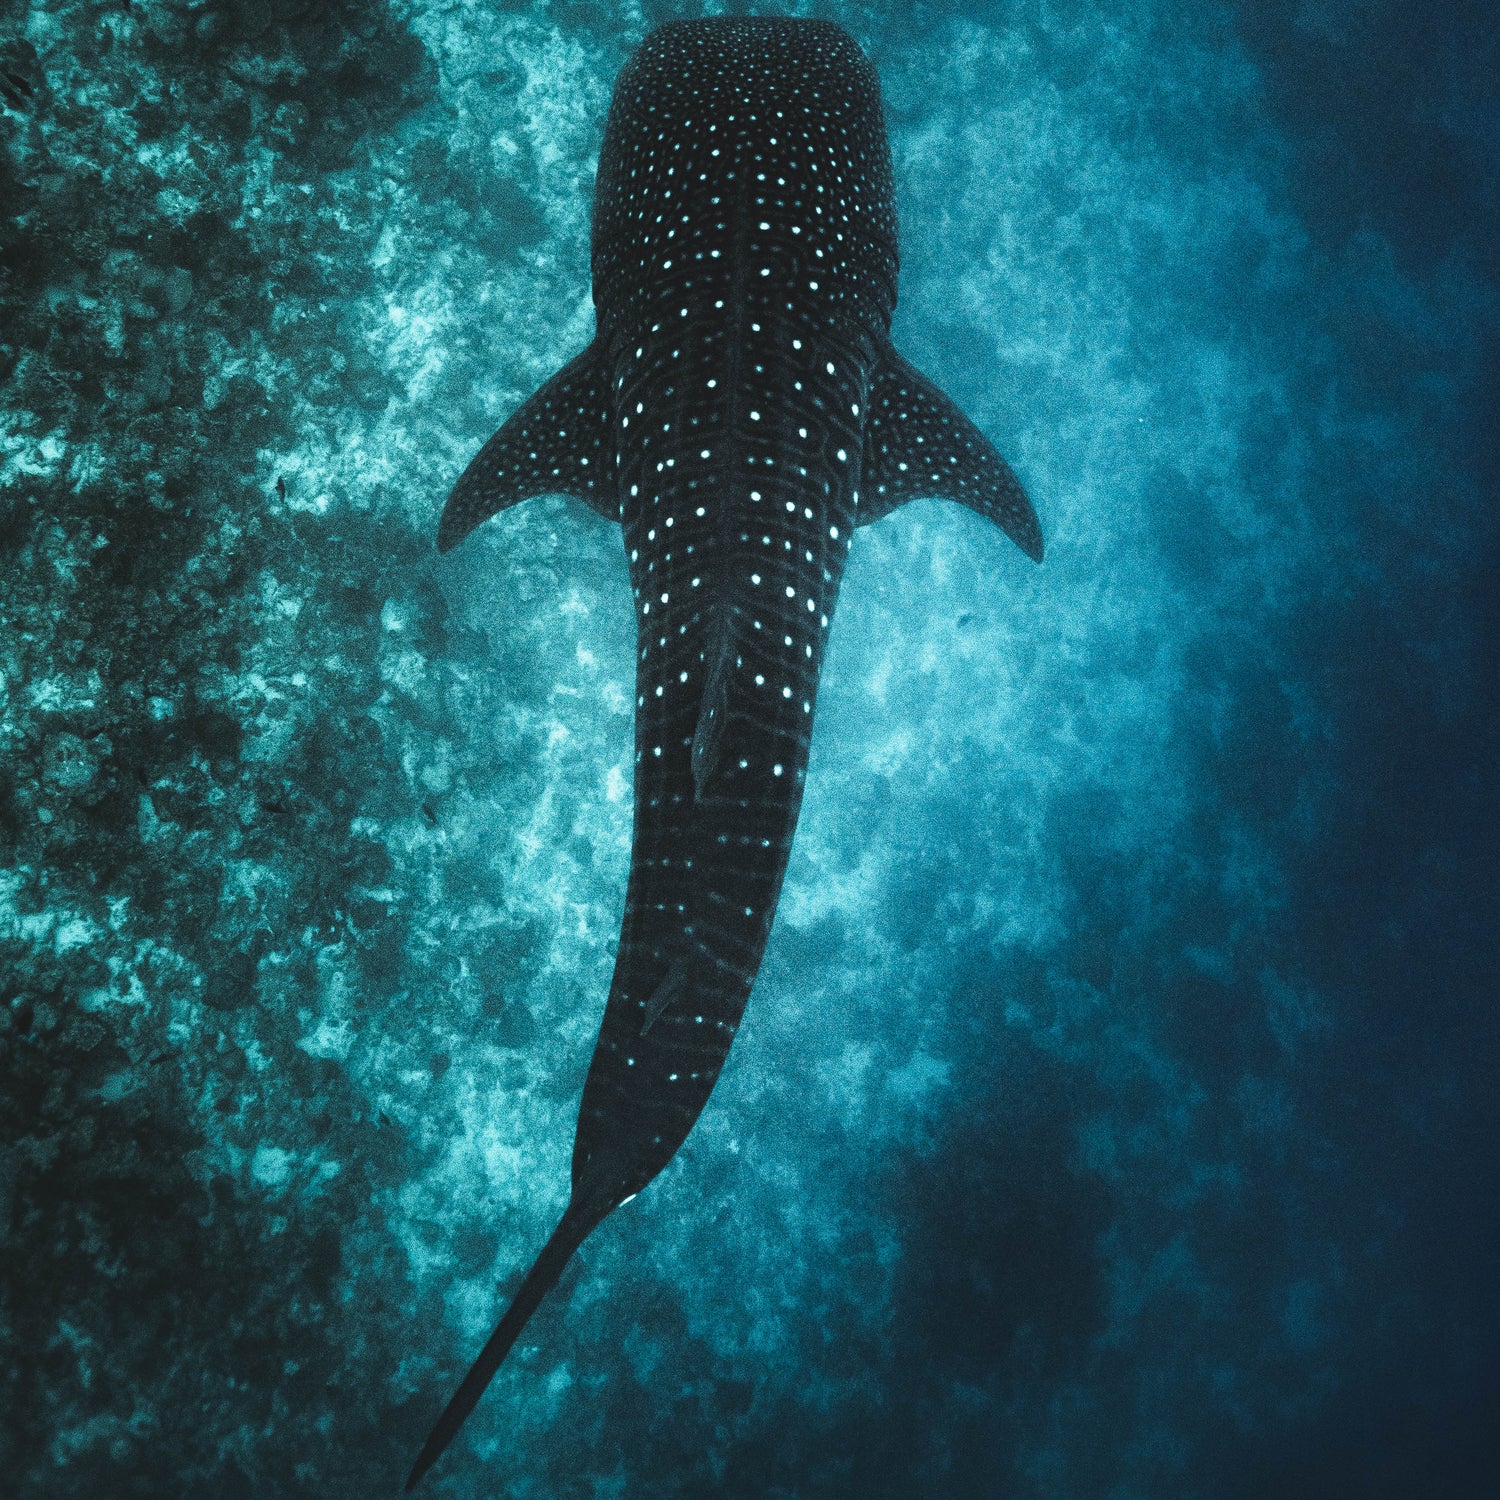 whale shark pictured from above - getpinkfit donates 10% to Mission Blue ocean conservation efforts